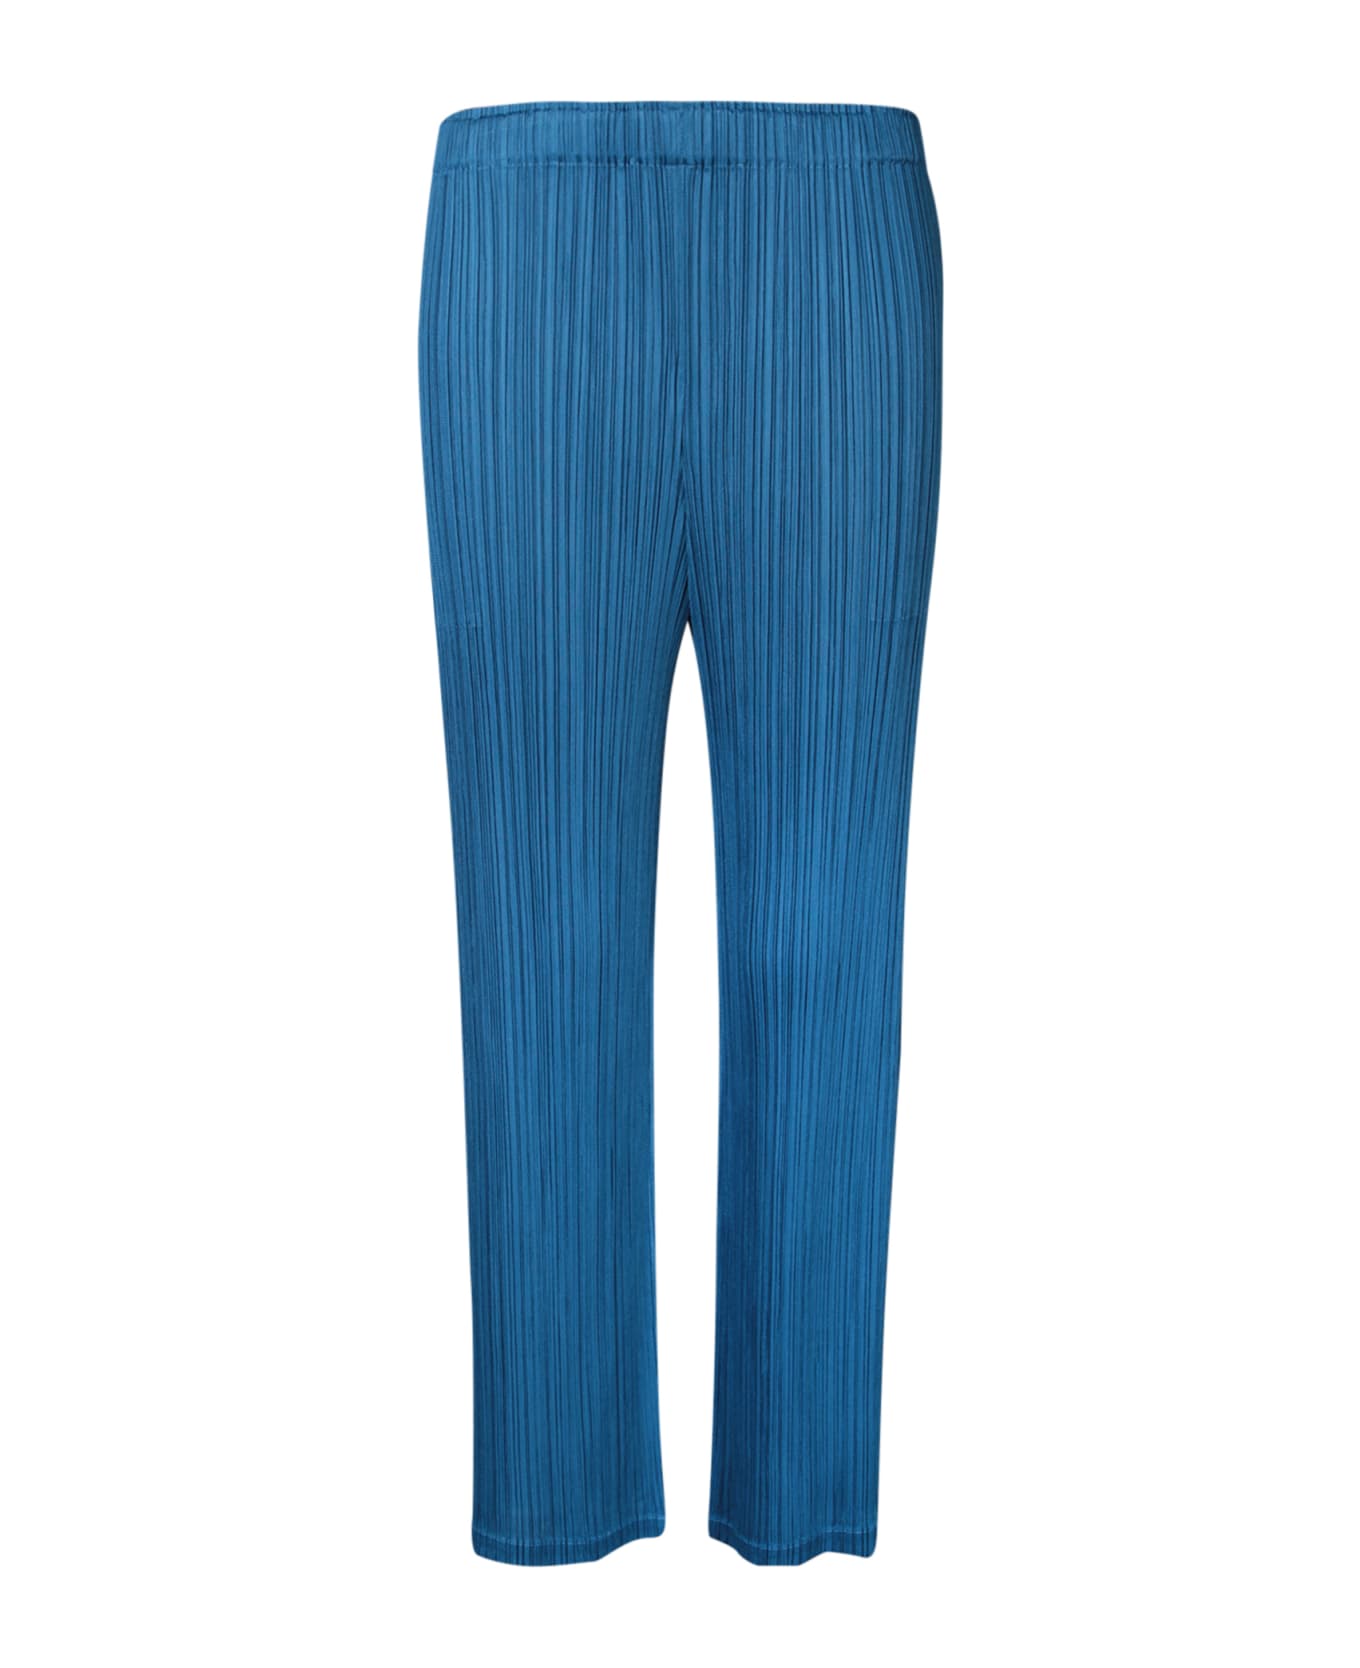 Issey Miyake Pleats Please Teal Trousers - Blue ボトムス